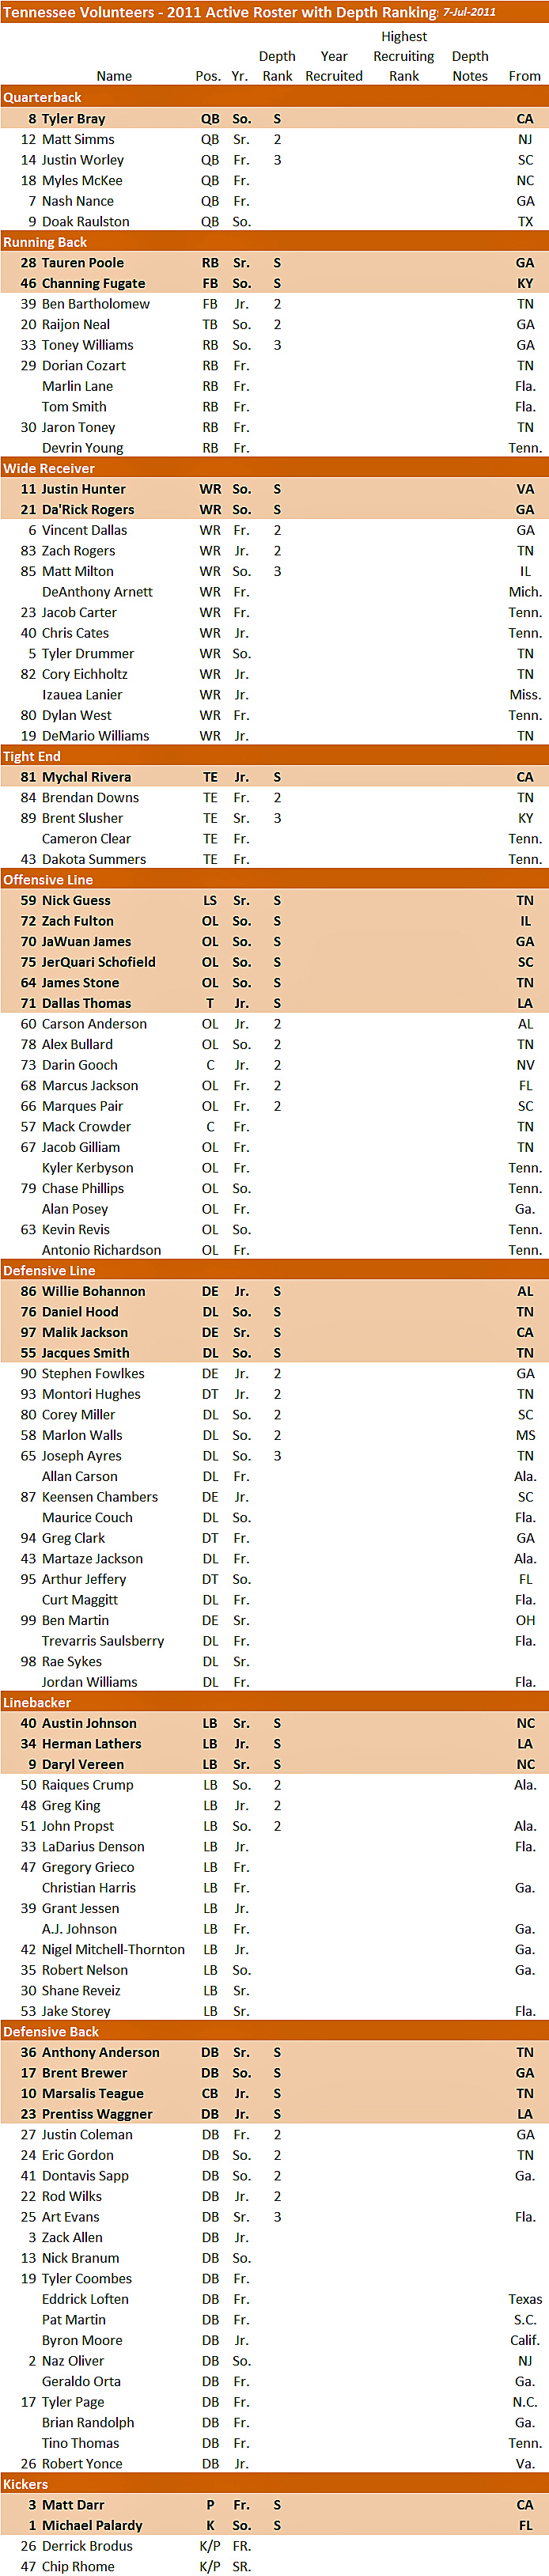 Tennessee Depth Chart